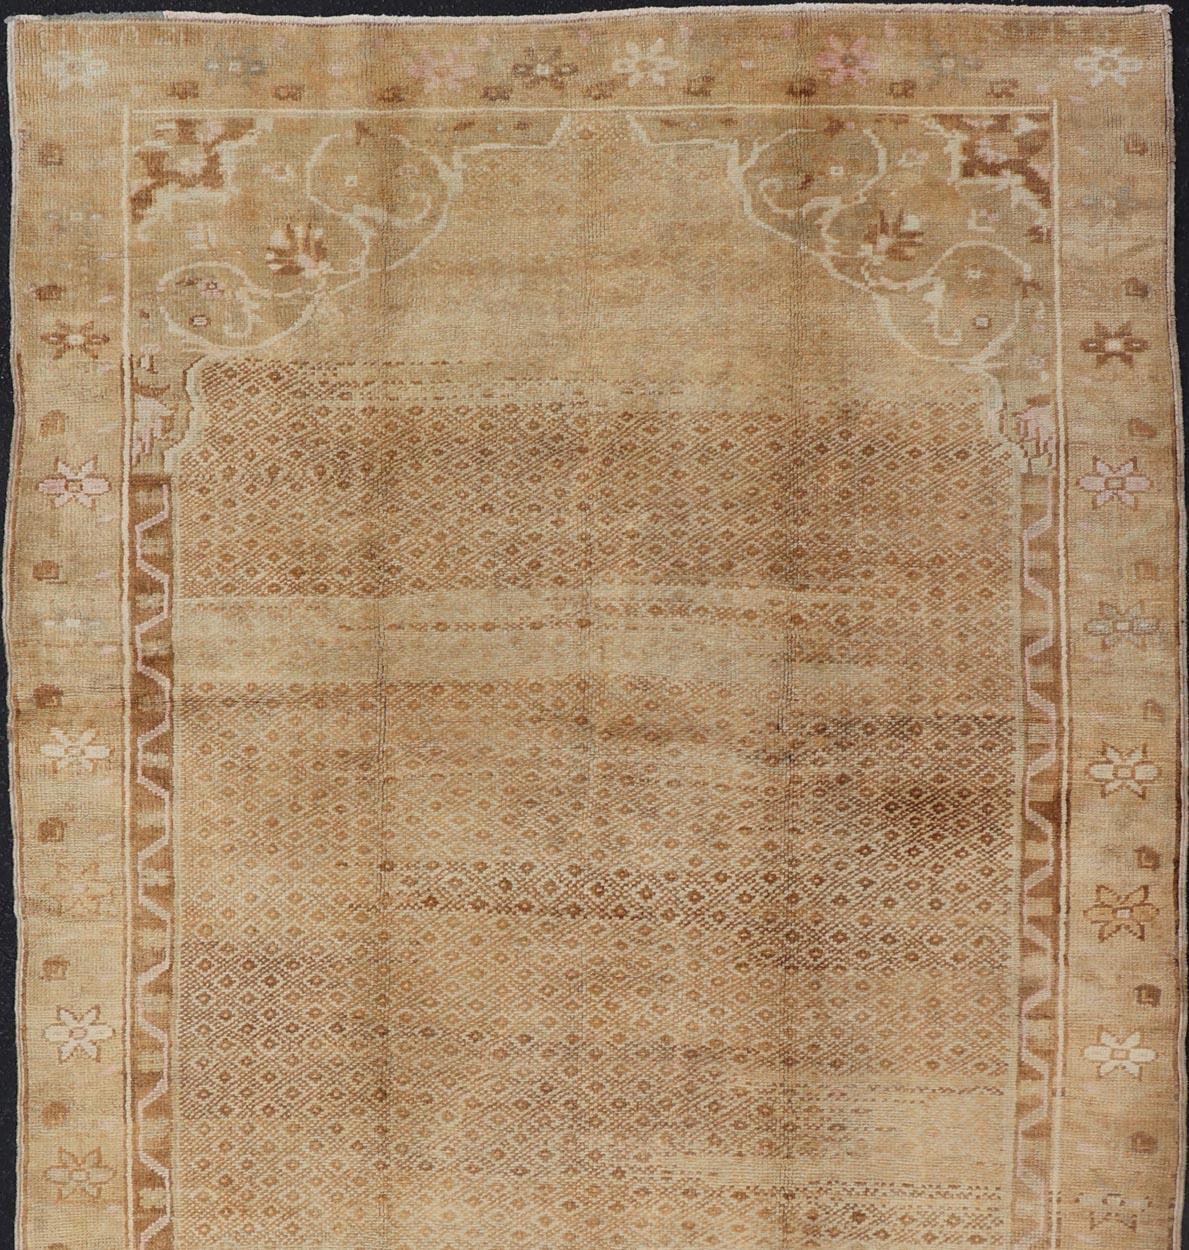 Tan and Taupe vintage Turkish rug with all-over repeat design and floral border, rug ars-816, country of origin / type: Turkey / Oushak, circa mid-20th century

This vintage Turkish gallery rug (circa mid-20th century) features a unique blend of